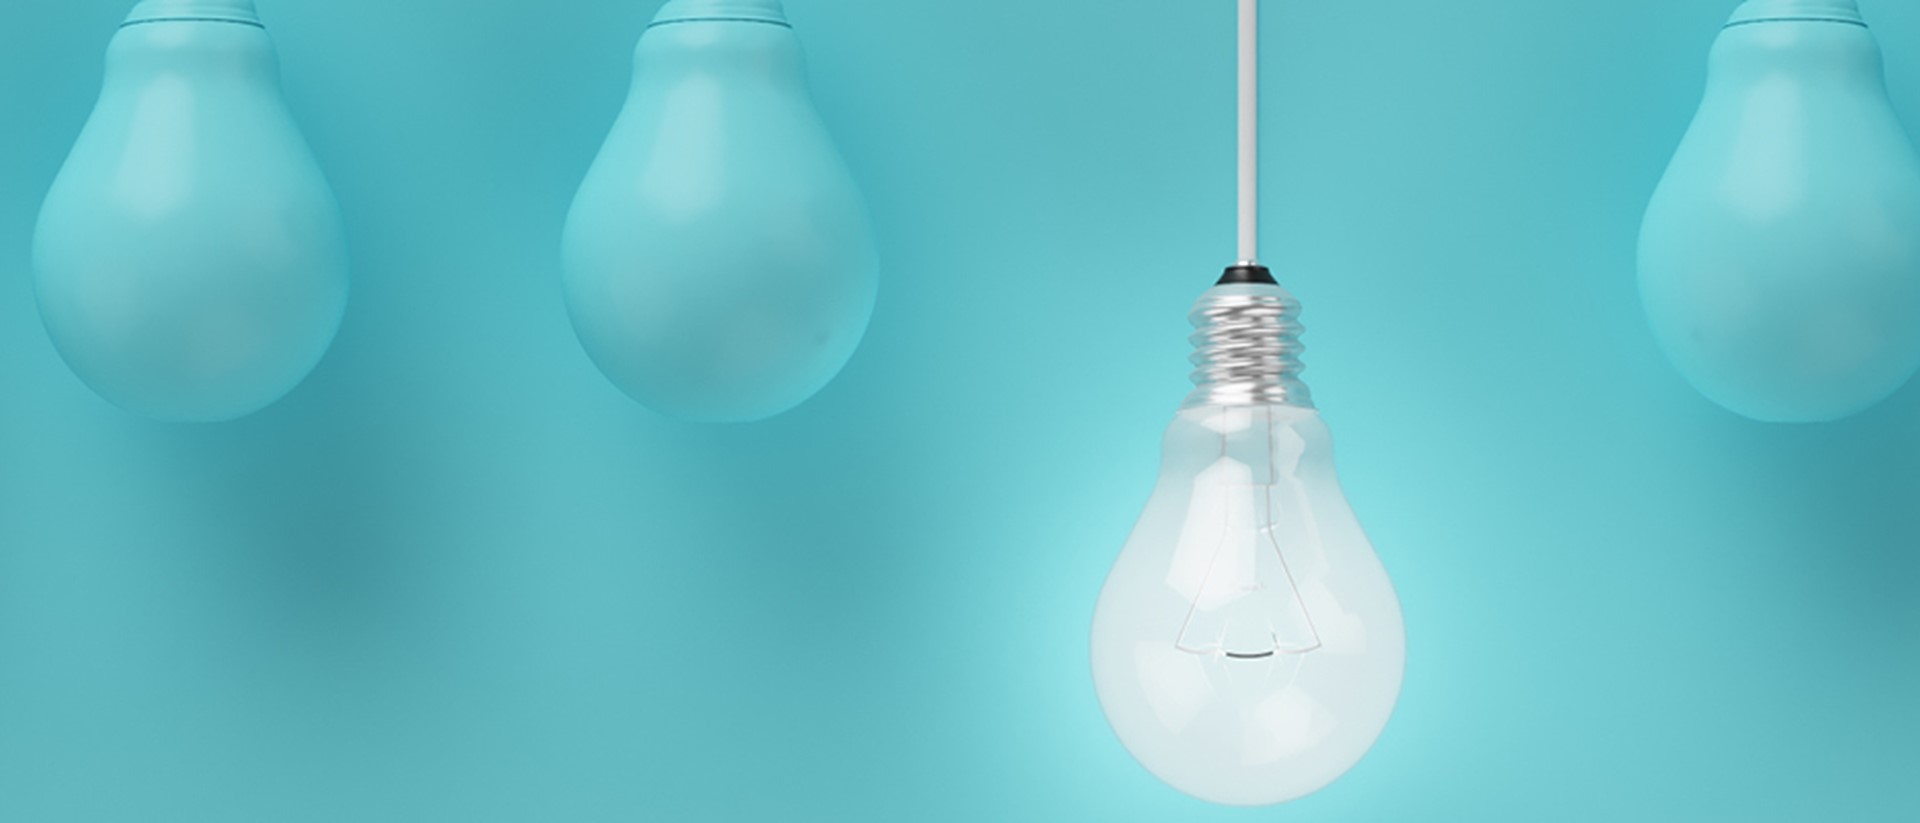 Image of a lightbulb hanging down with blue lightbulbs either side on a teal background